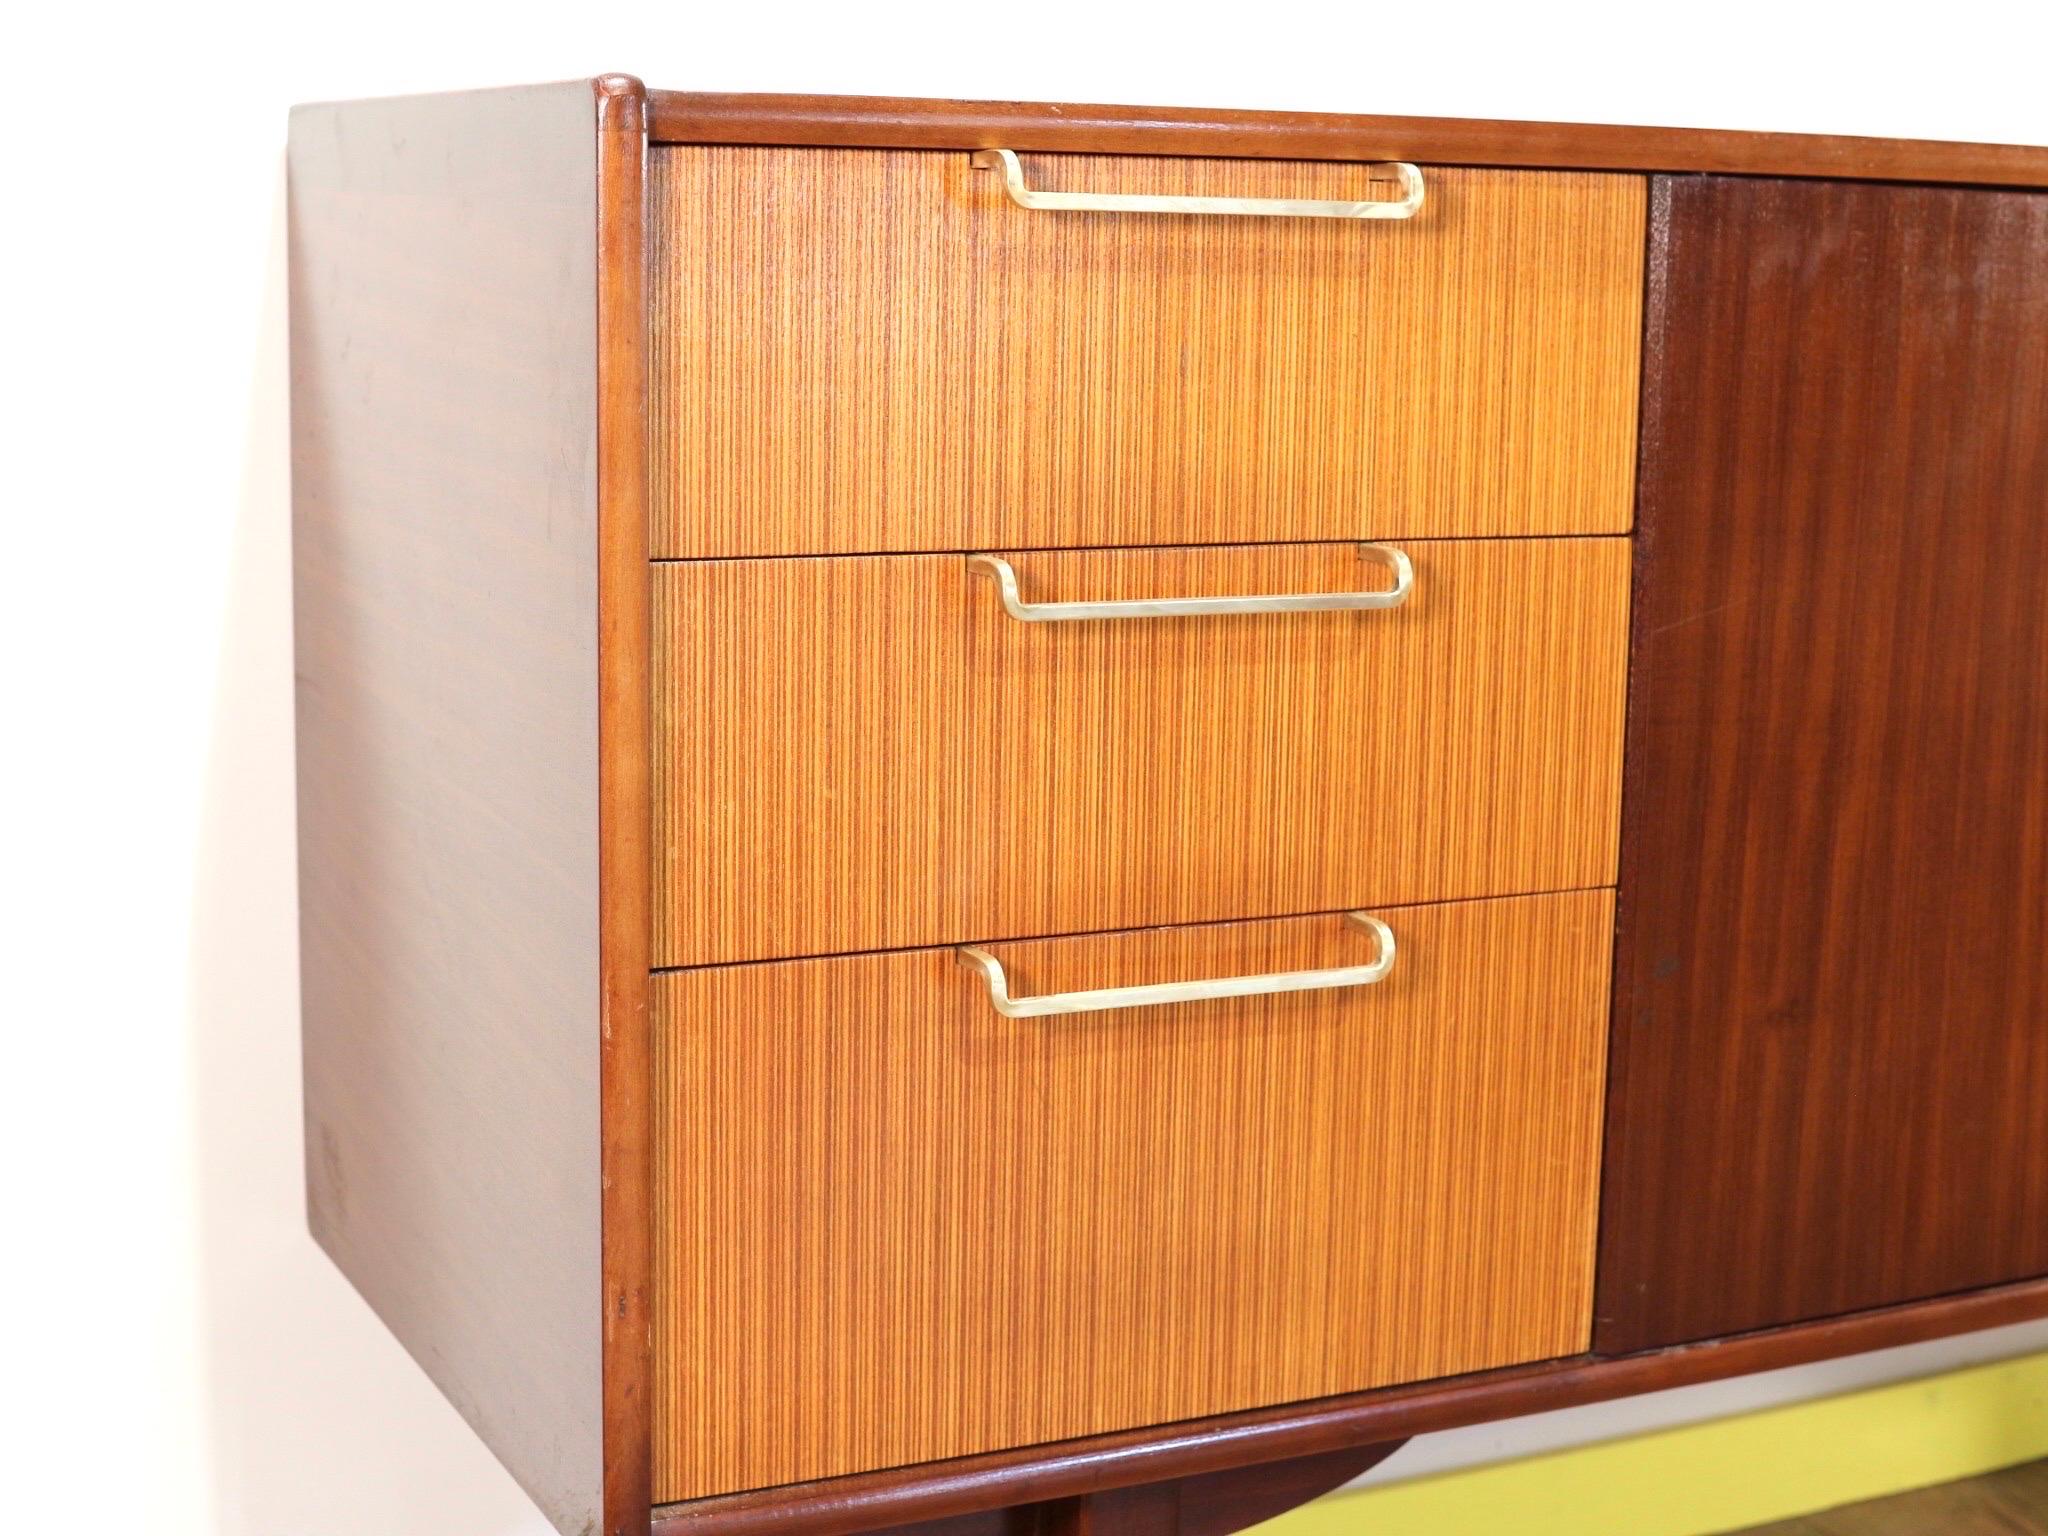 20th Century Mid-Century Modern Credenza Sideboard by Beautility